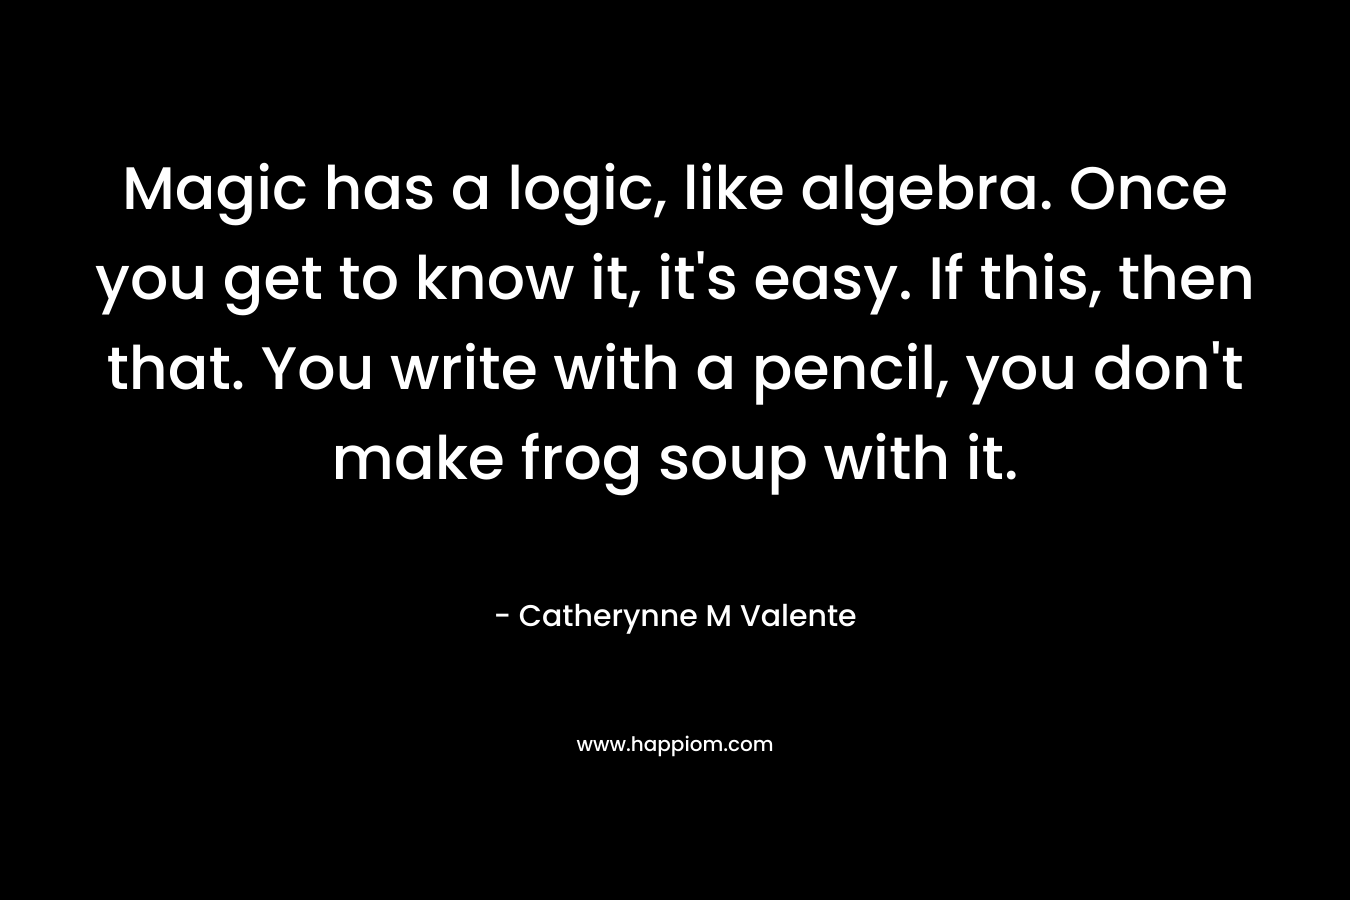 Magic has a logic, like algebra. Once you get to know it, it's easy. If this, then that. You write with a pencil, you don't make frog soup with it.